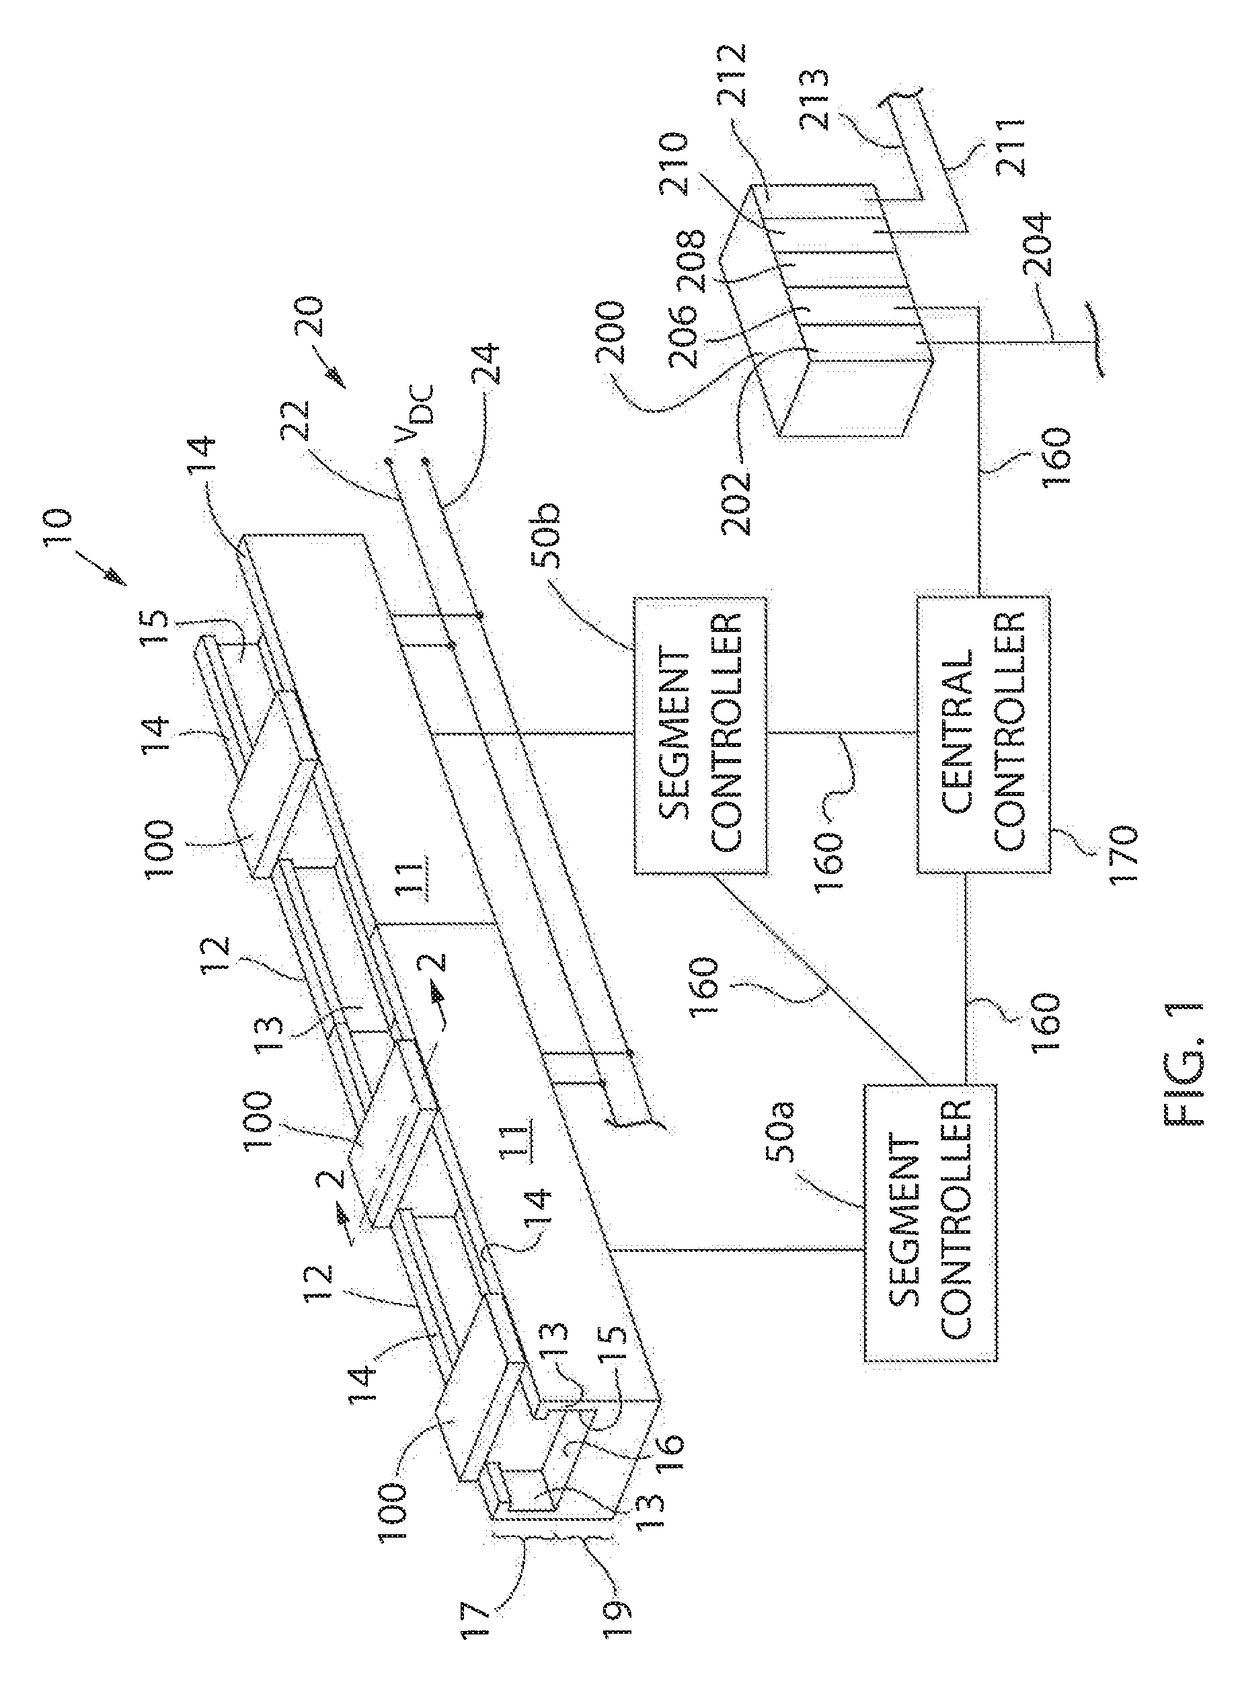 Method and Apparatus to Diagnose a Linear Synchronous Motor System